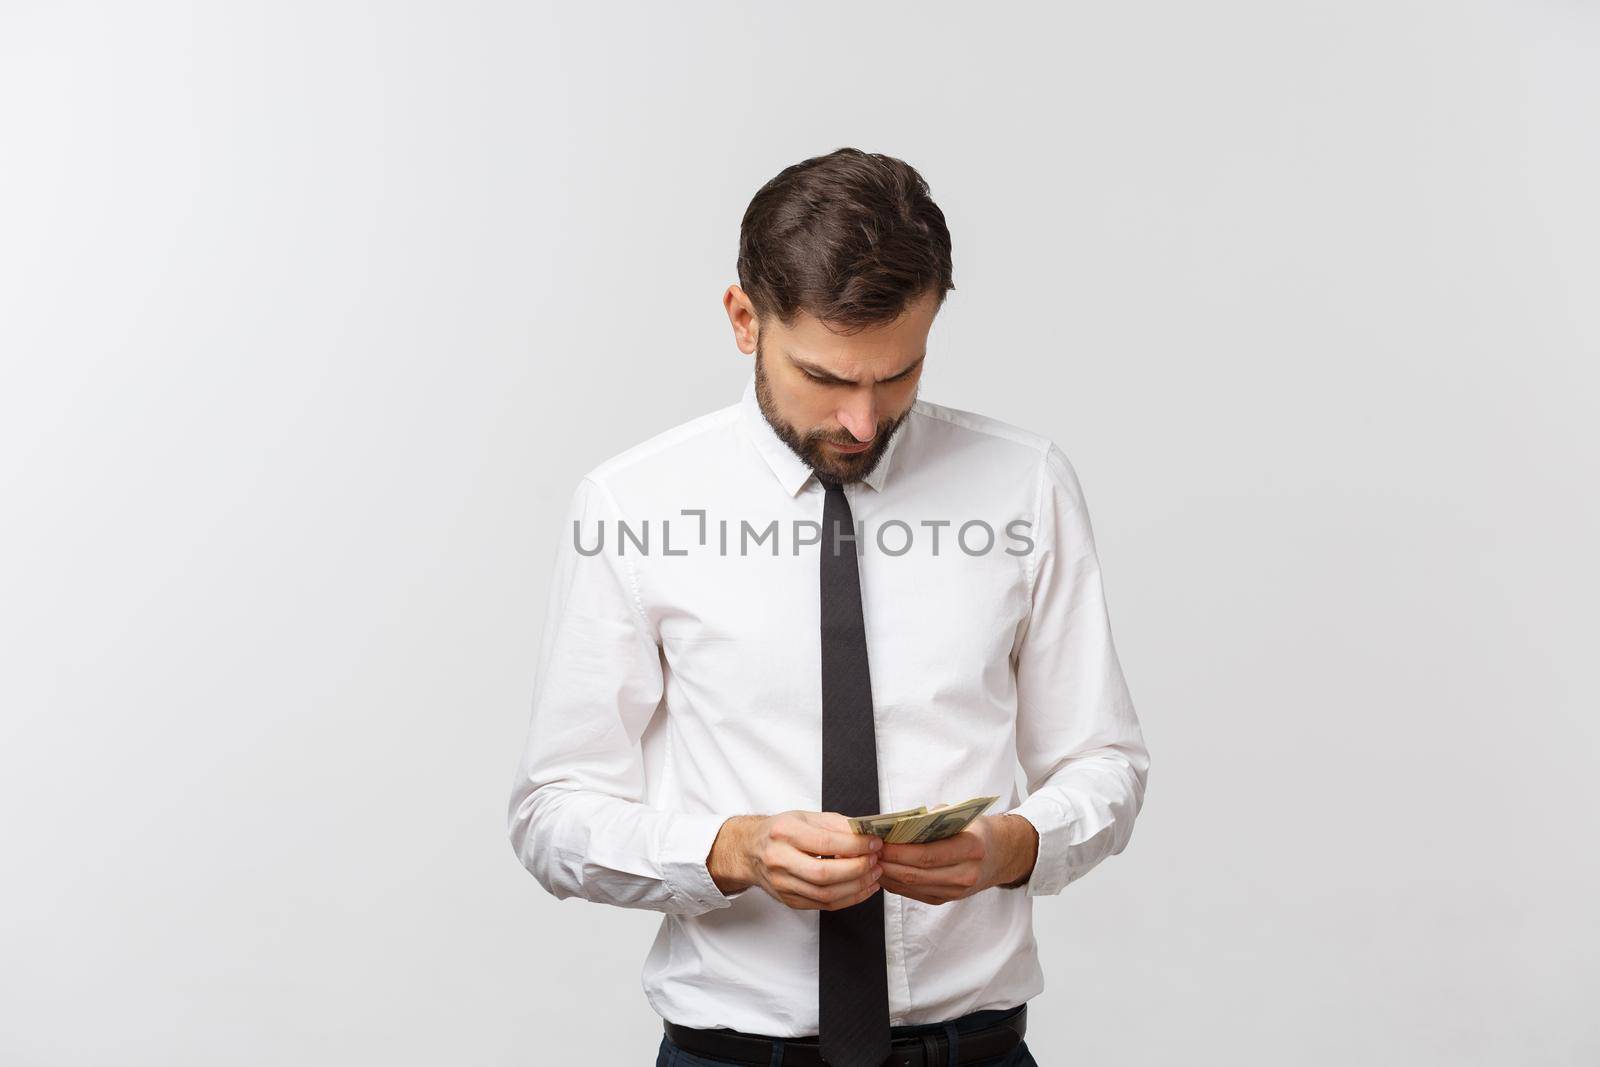 Portrait of a business man holding money, isolated on white